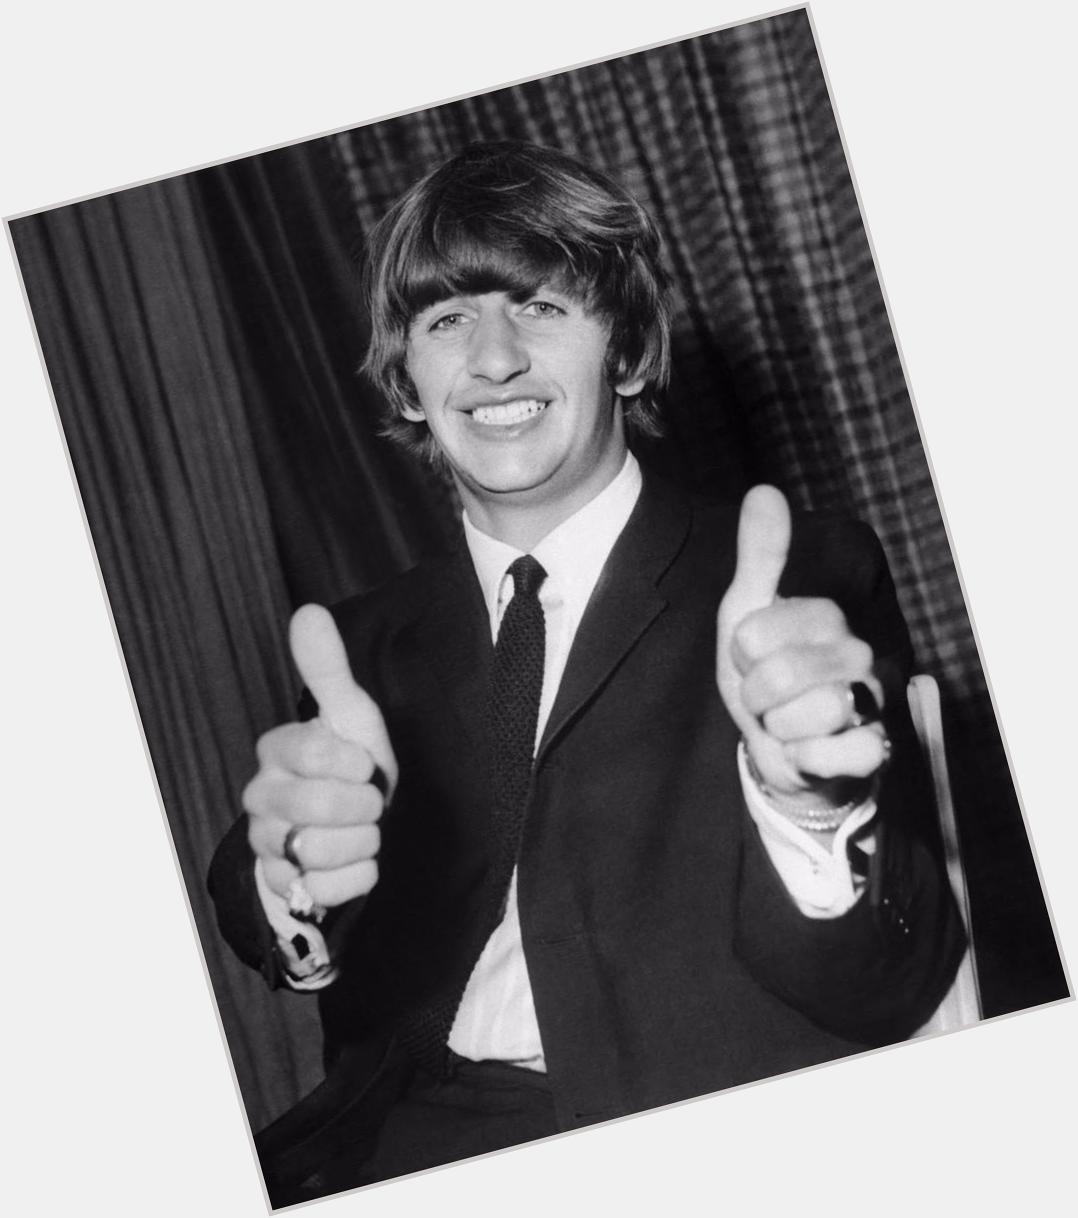 Happy Birthday Ringo Starr, The Beatles drummer born on this day in 1940.  via 